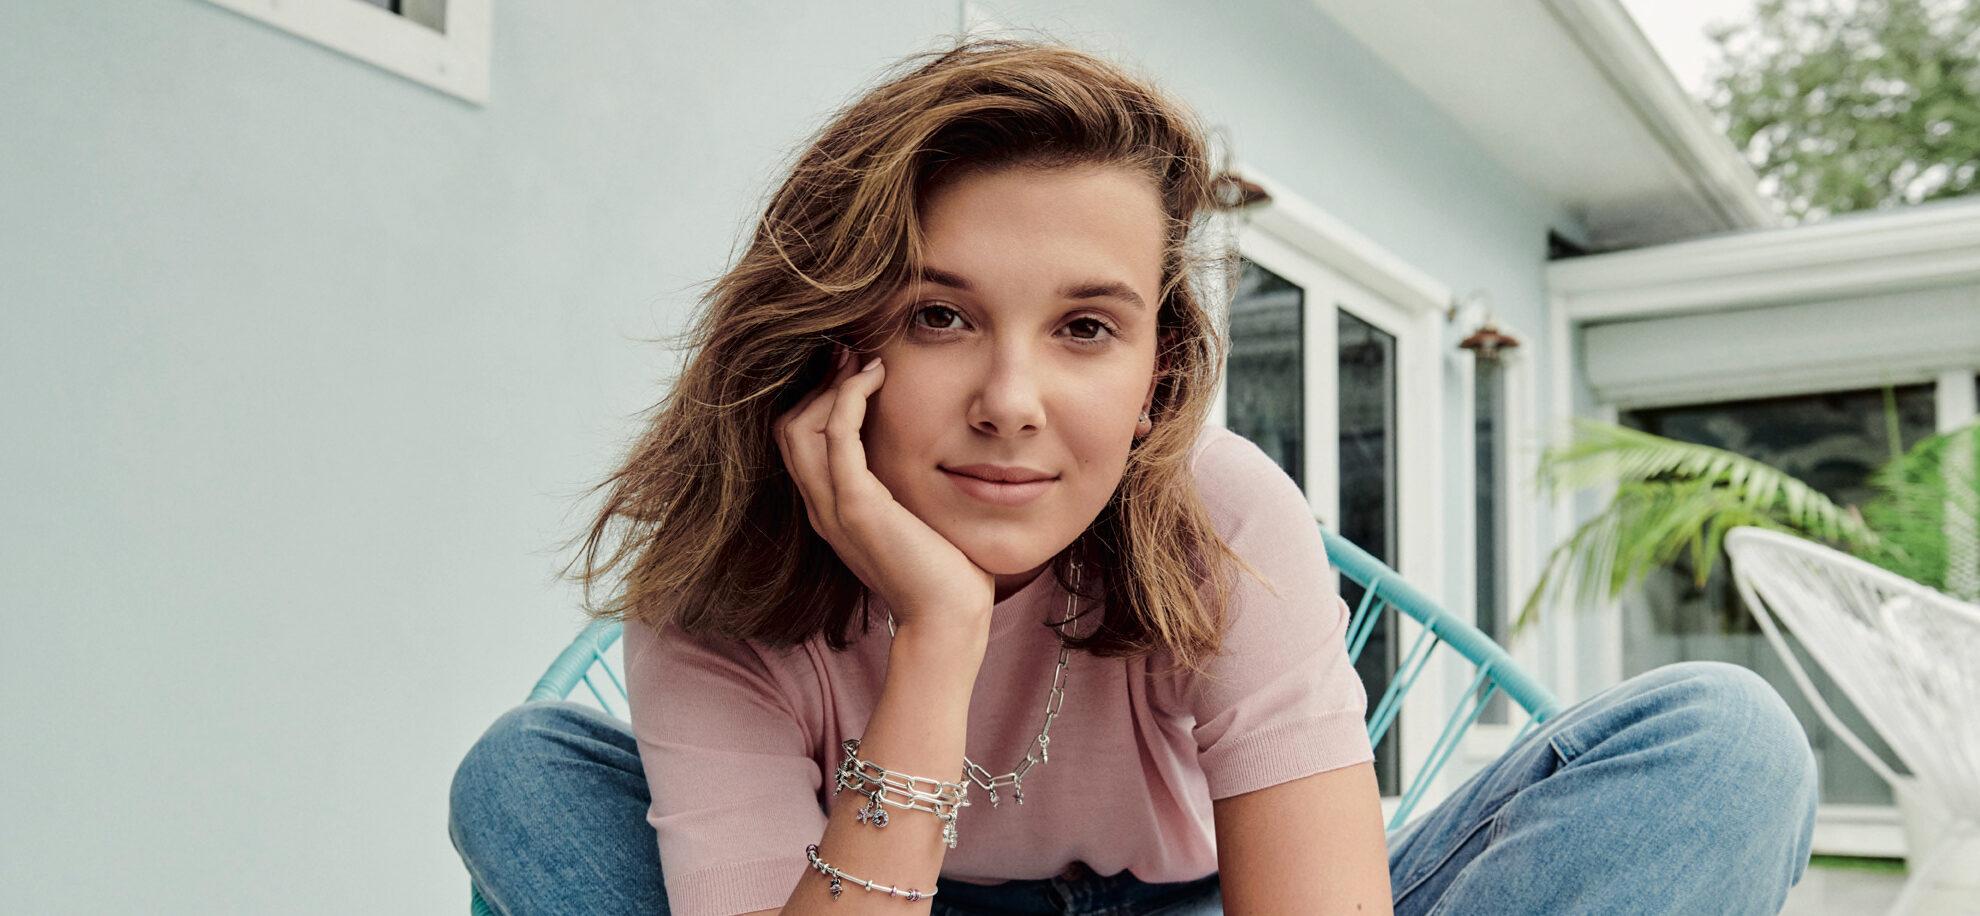 Millie Bobby Brown Gets Cozy With New Beau On Instagram